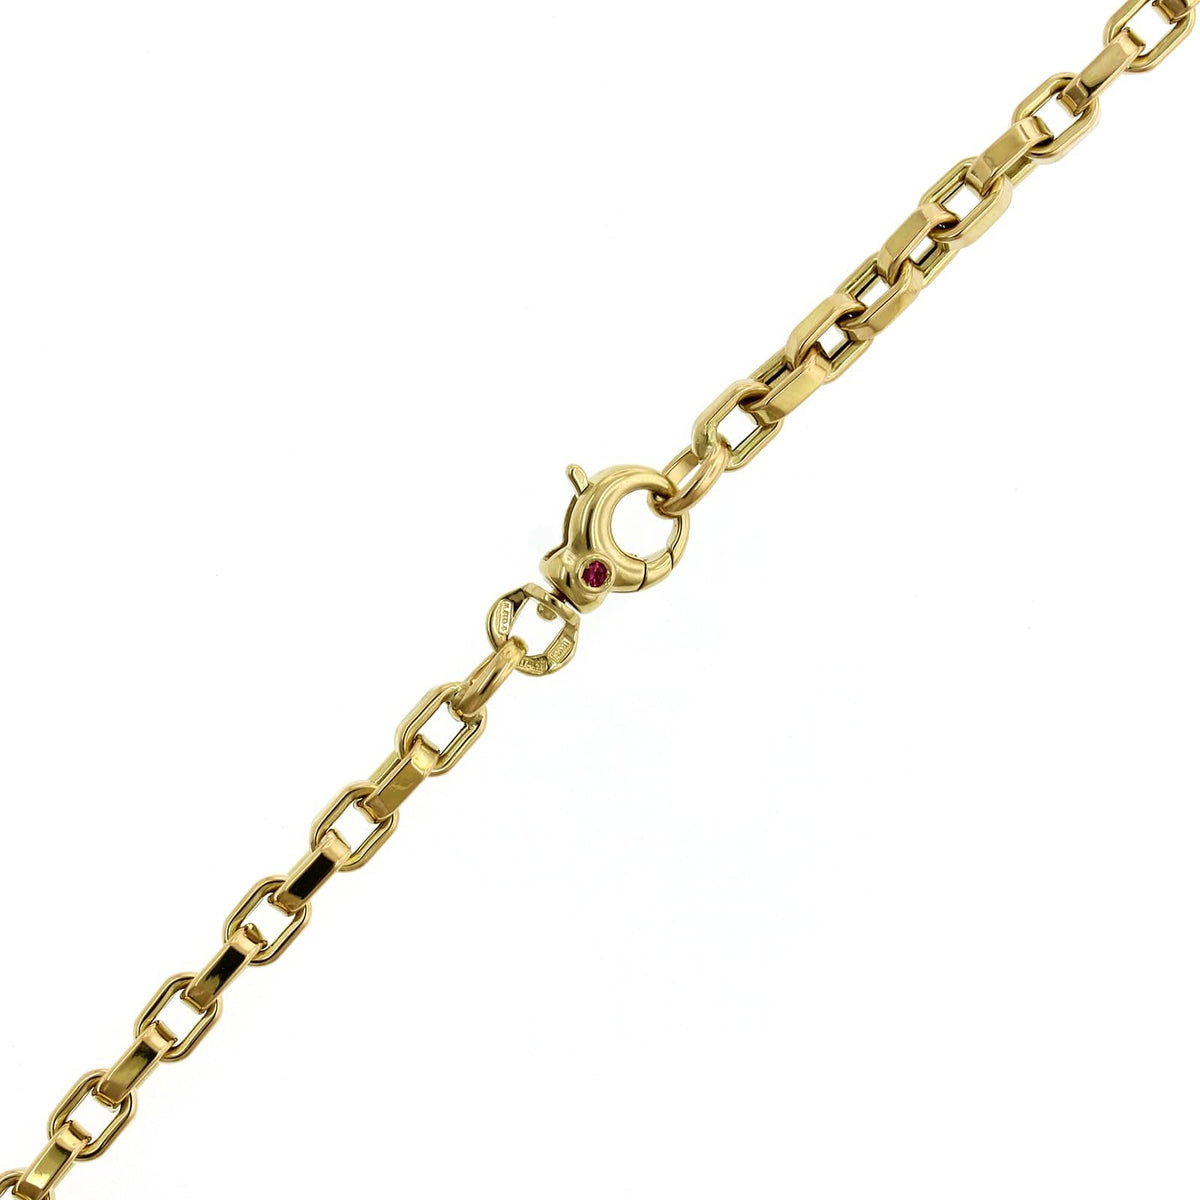 Roberto Coin 18K Yellow Gold Square Link Chain Necklace